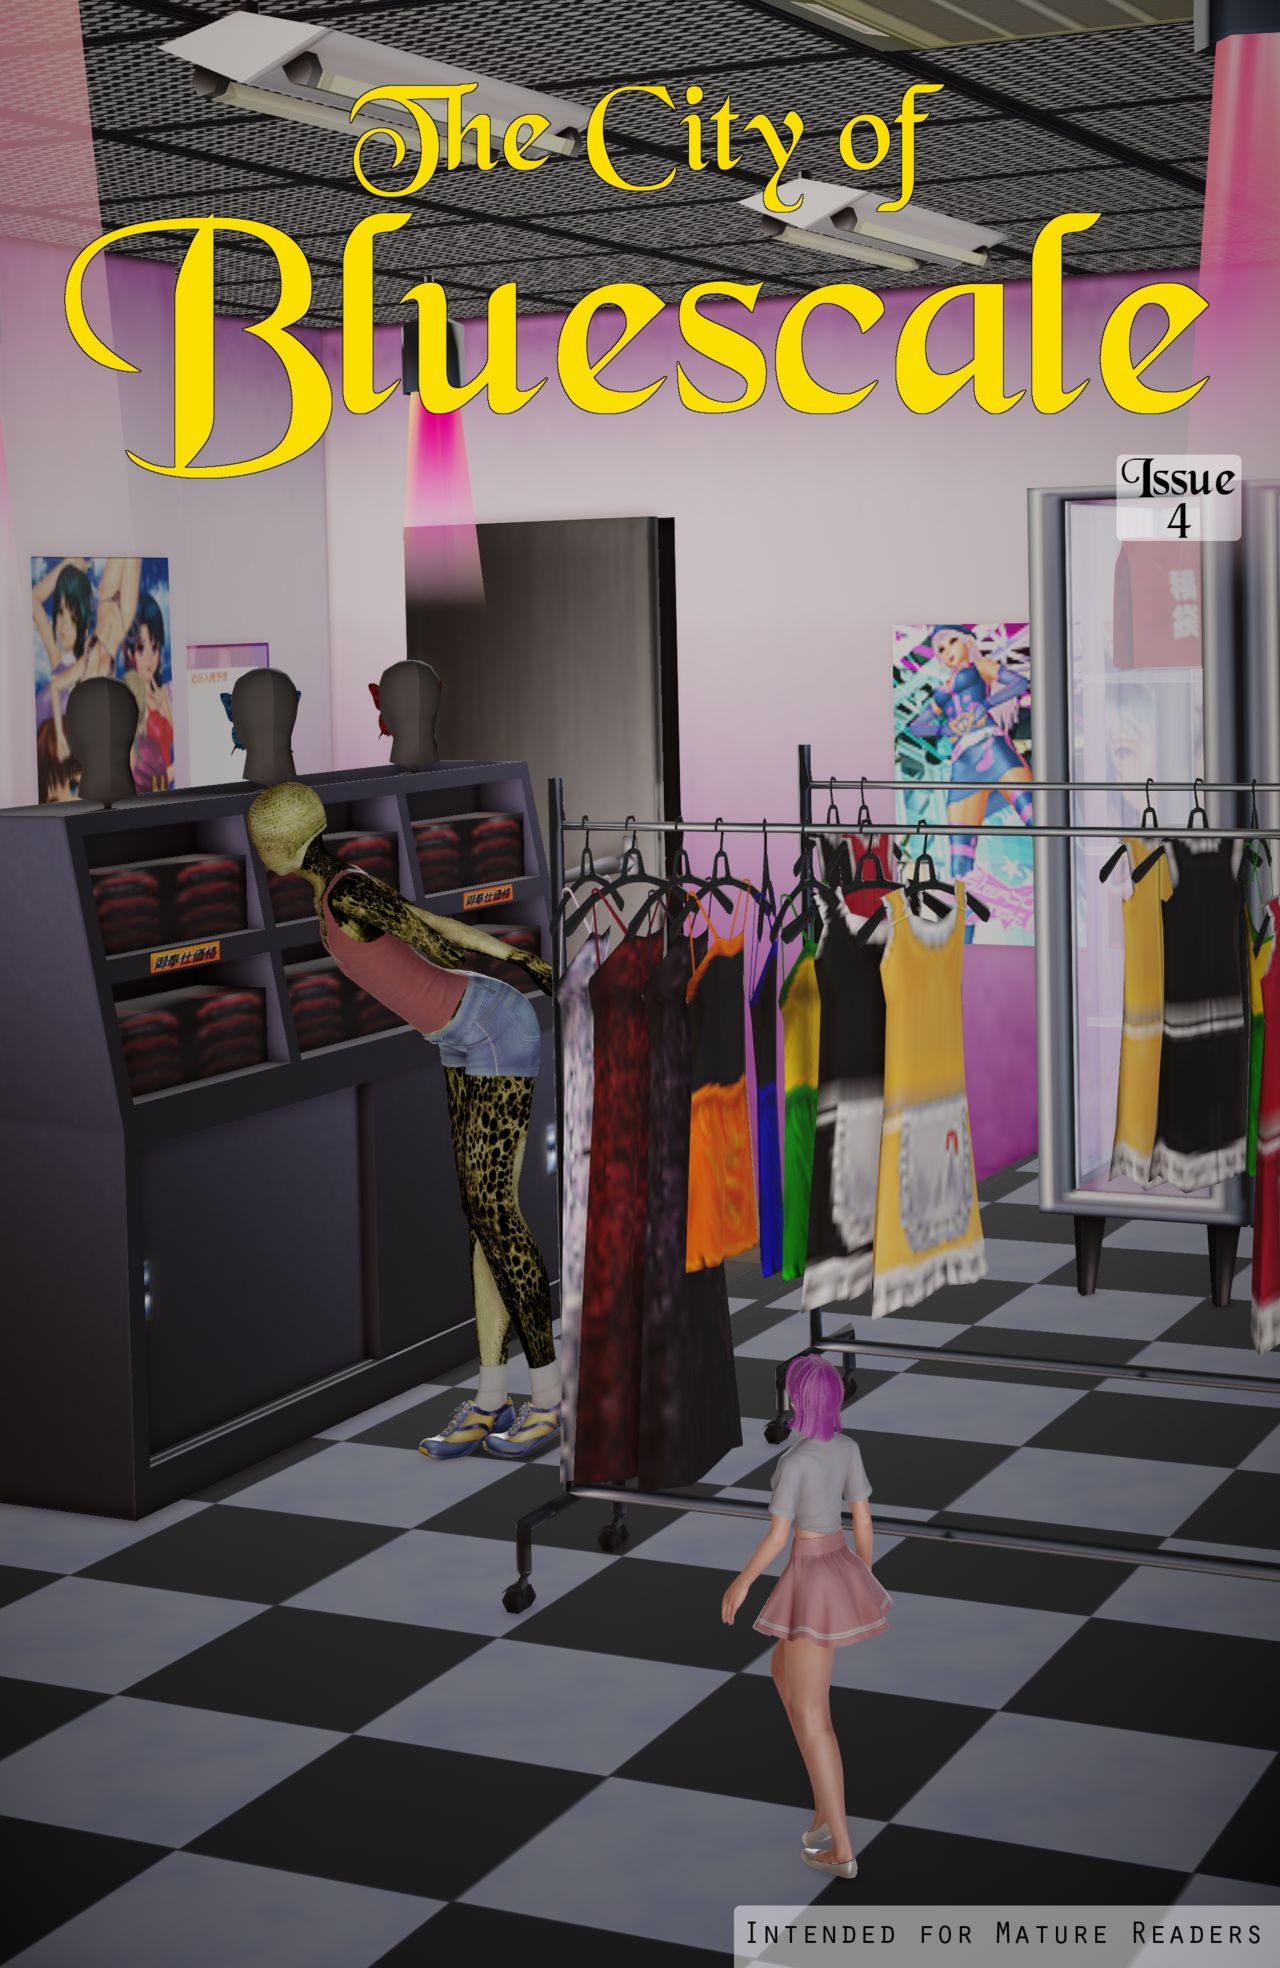 Bluescale Chapter 7 (City of Bluescale Issue 4, September 2019) 0